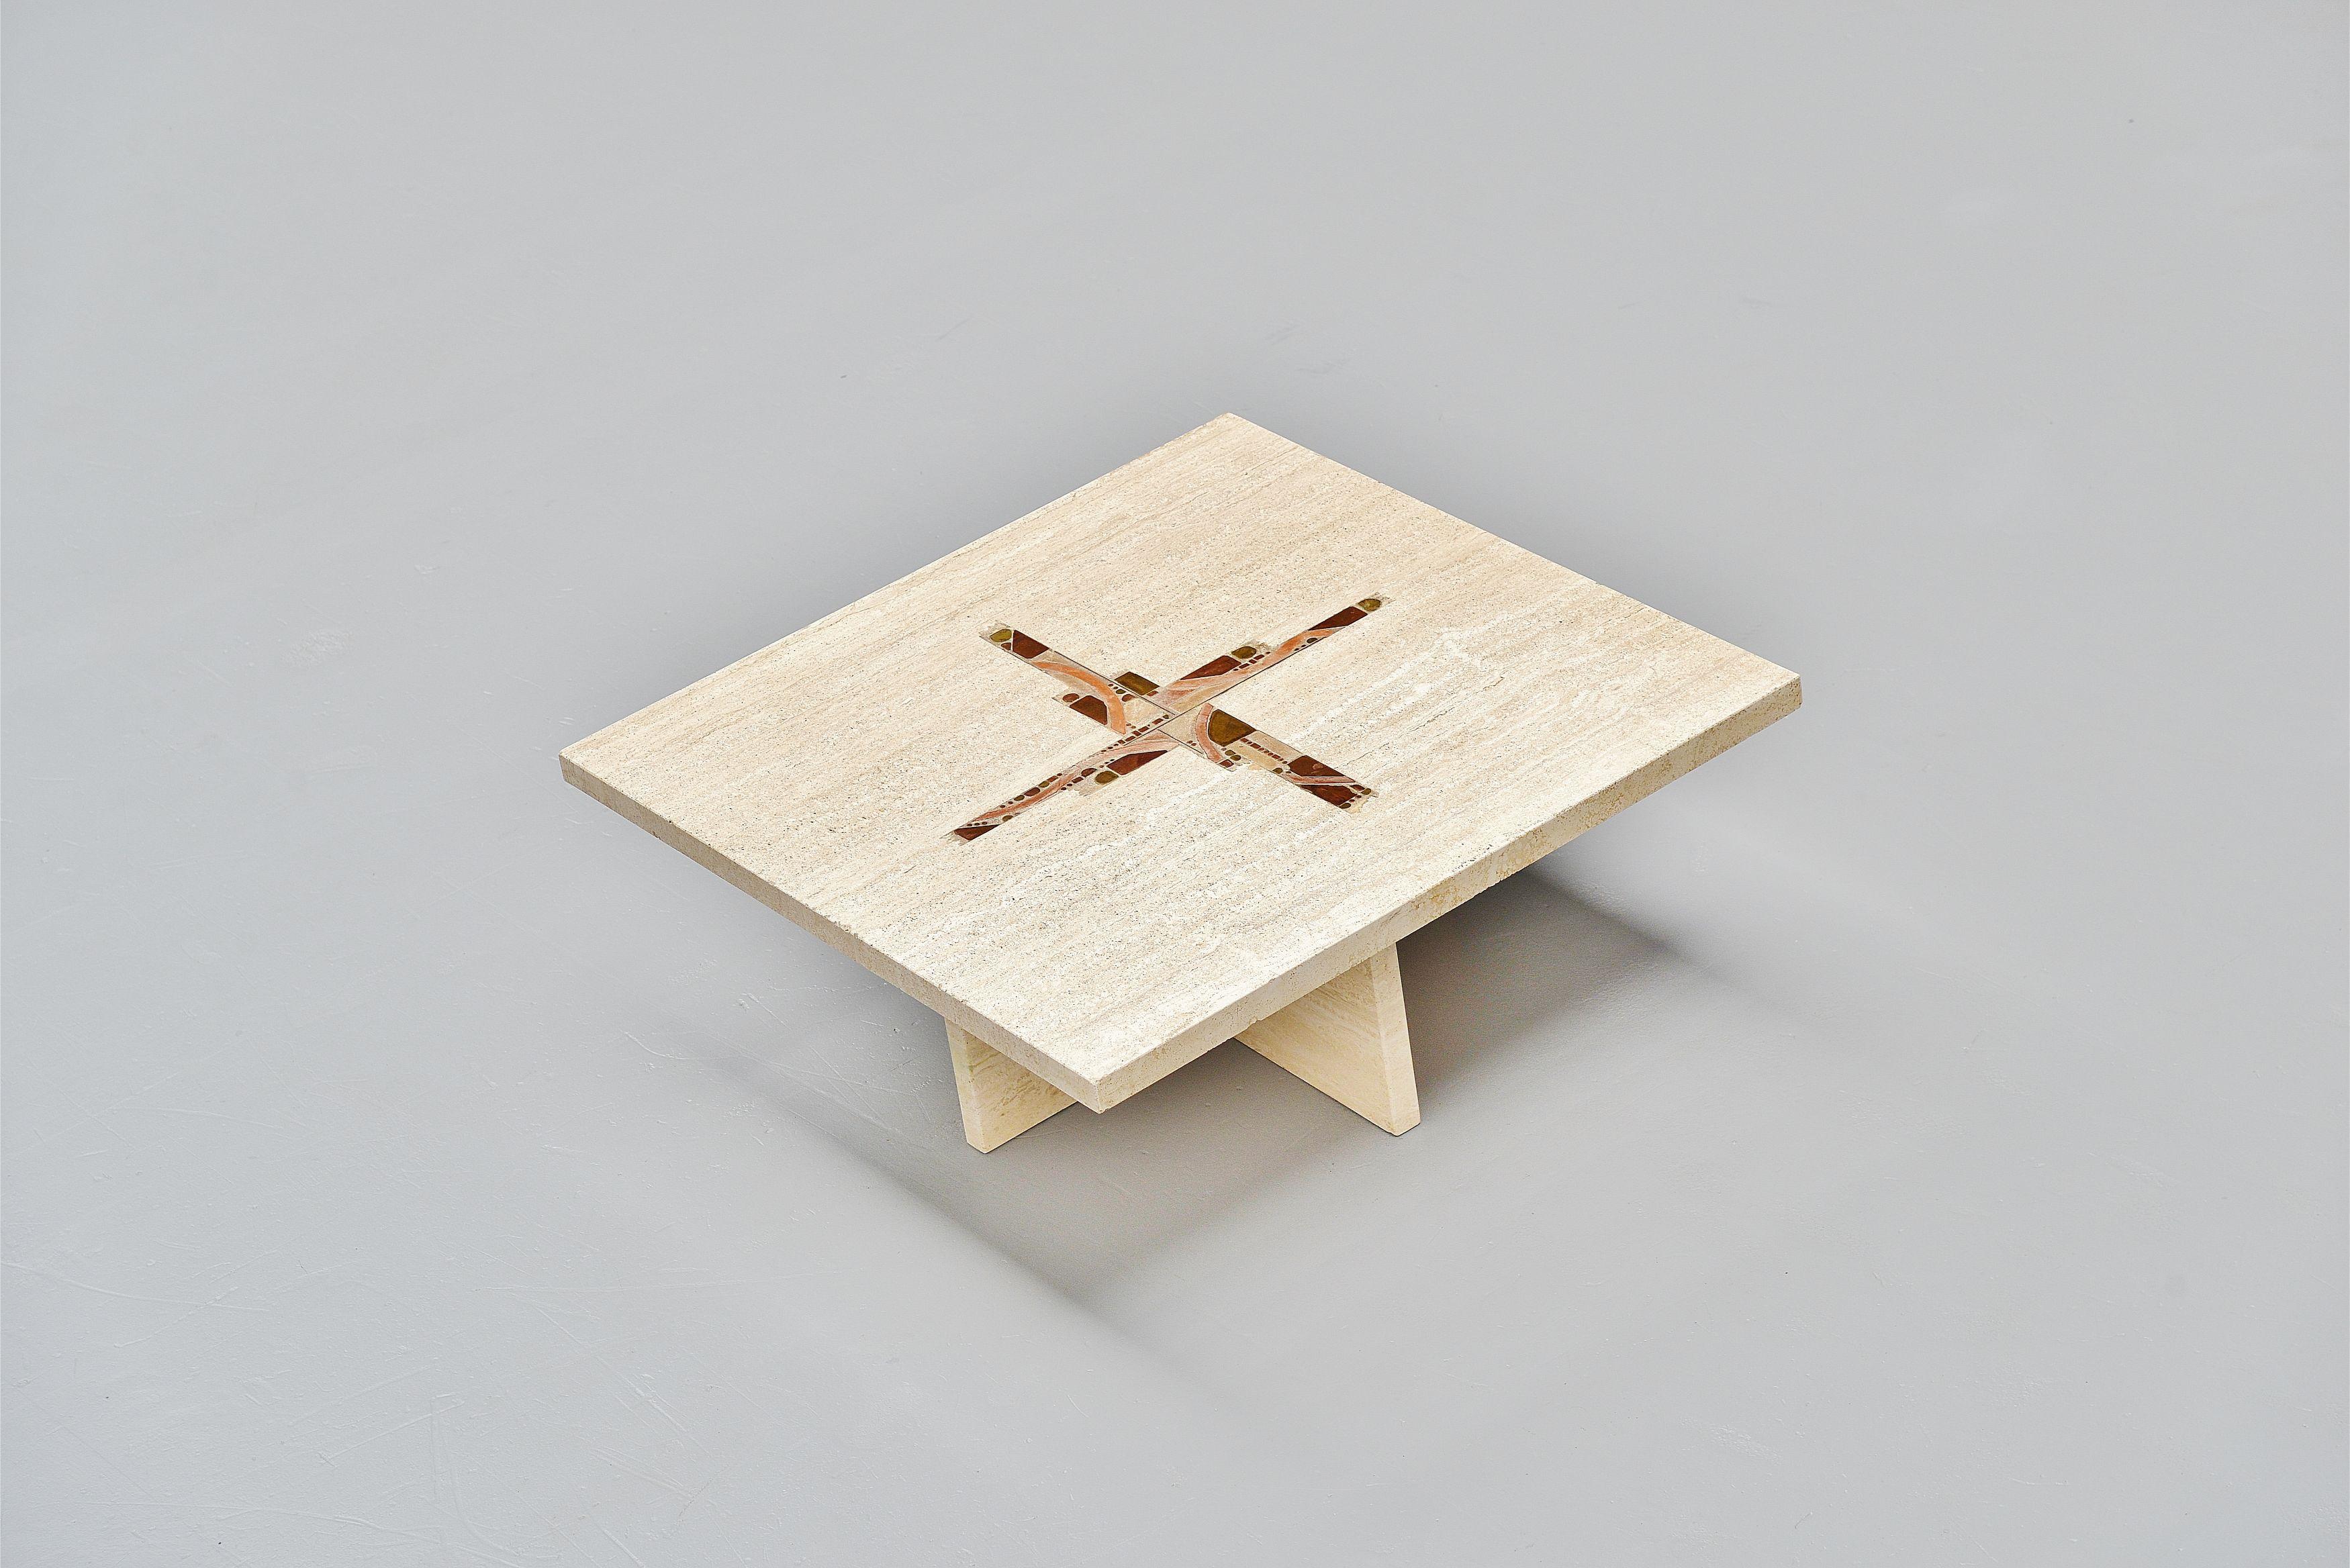 Nice solid travertin coffee table with cross inlay designed and made by Paul Kingma, Holland, 1978. The table is made of solid travertin and has an inlayed cross pattern with brass tiles and mineral stones. The table has a very nice brutal shape,